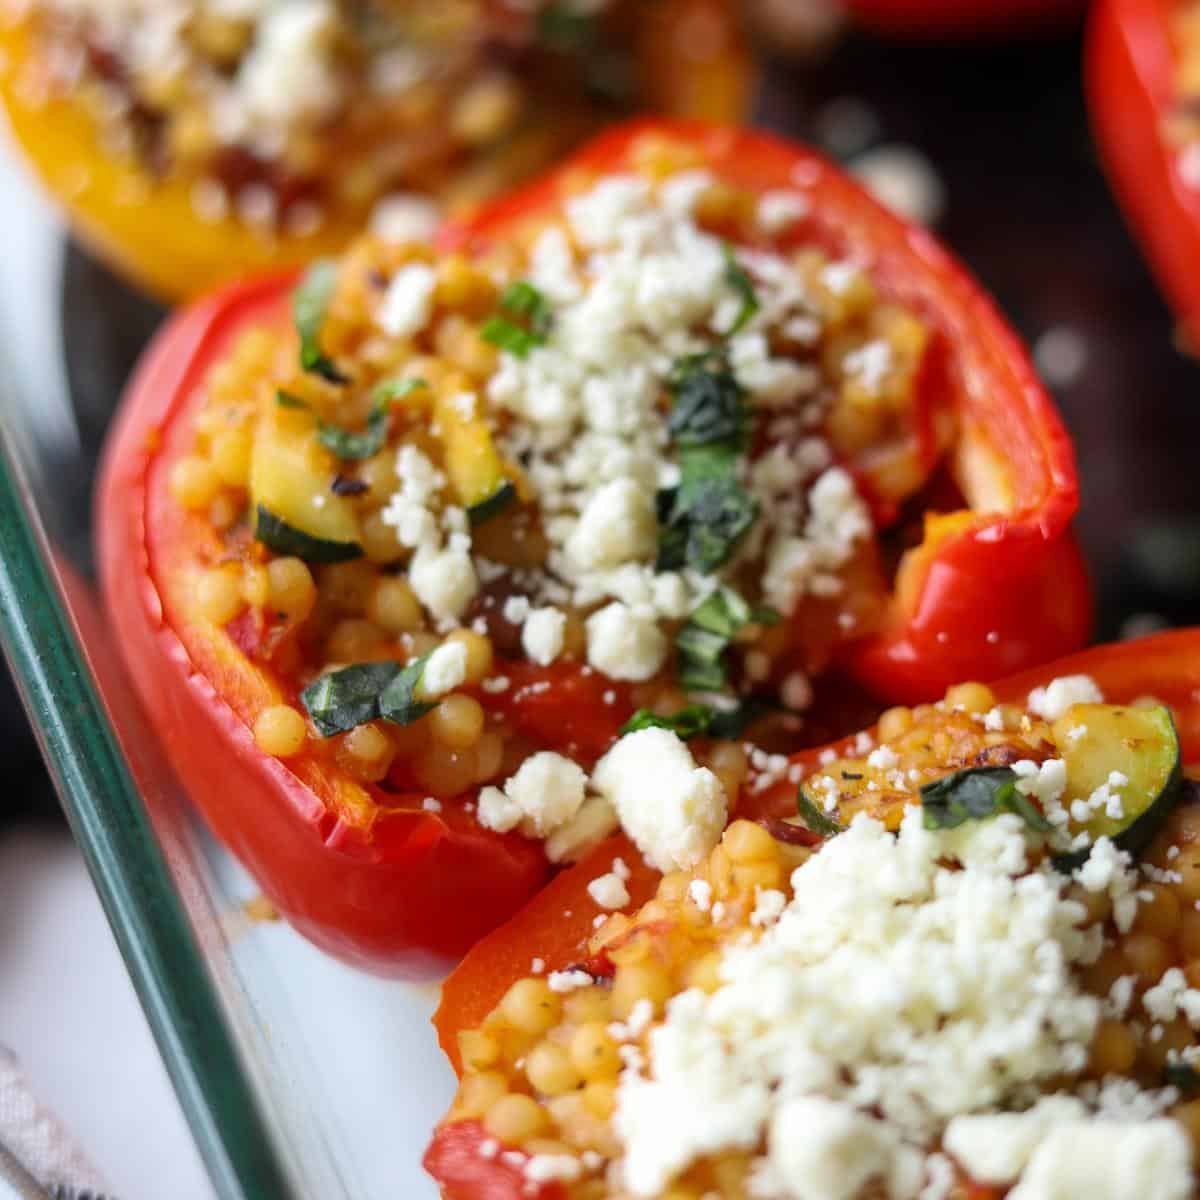 close up of red bell pepper stuffed with couscous filling